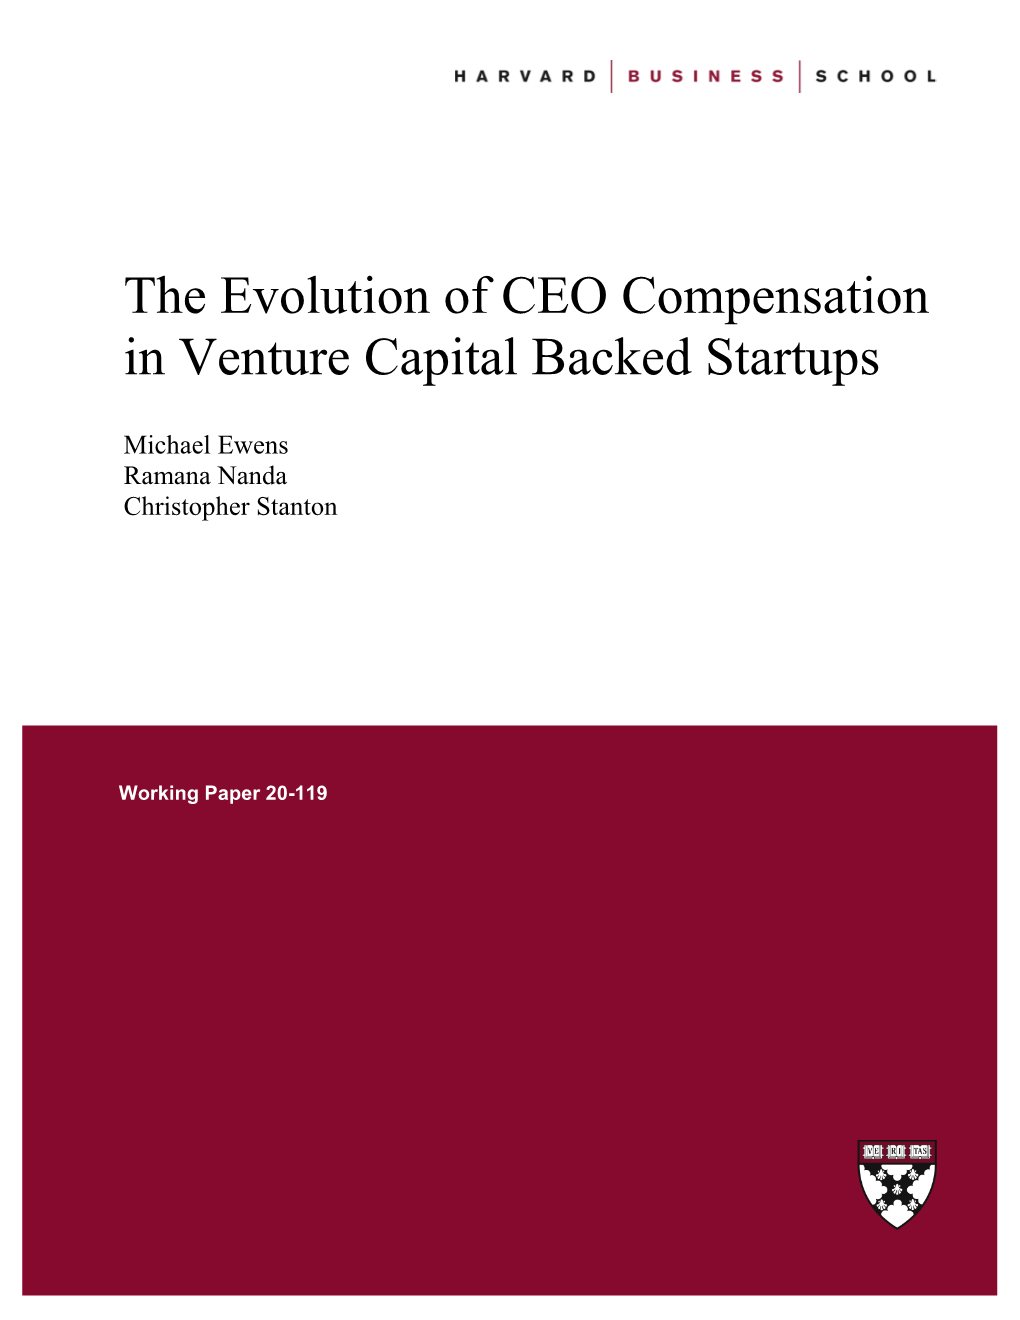 The Evolution of CEO Compensation in Venture Capital Backed Startups